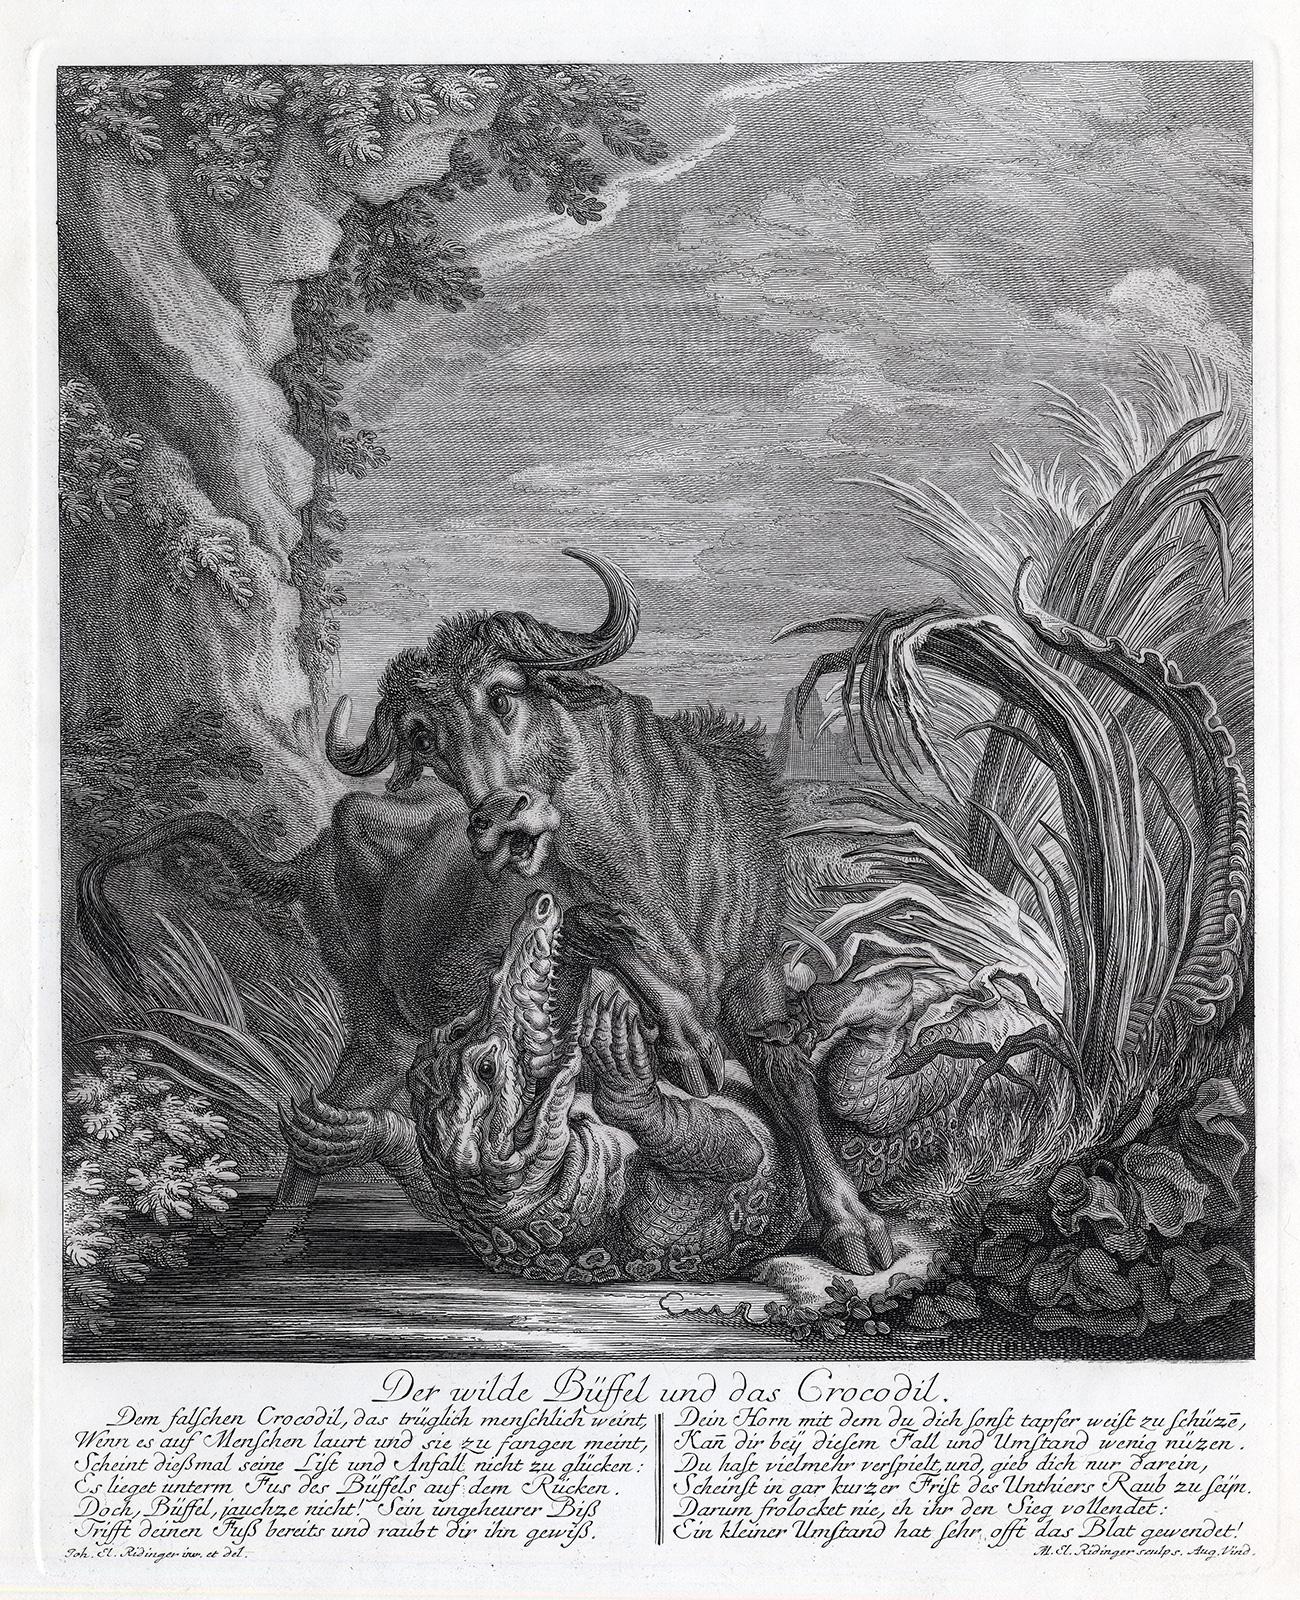 Martin Elias Ridinger Landscape Print - Hunting scene with water buffalo and crocodile by Ridinger - Engraving - 18th c